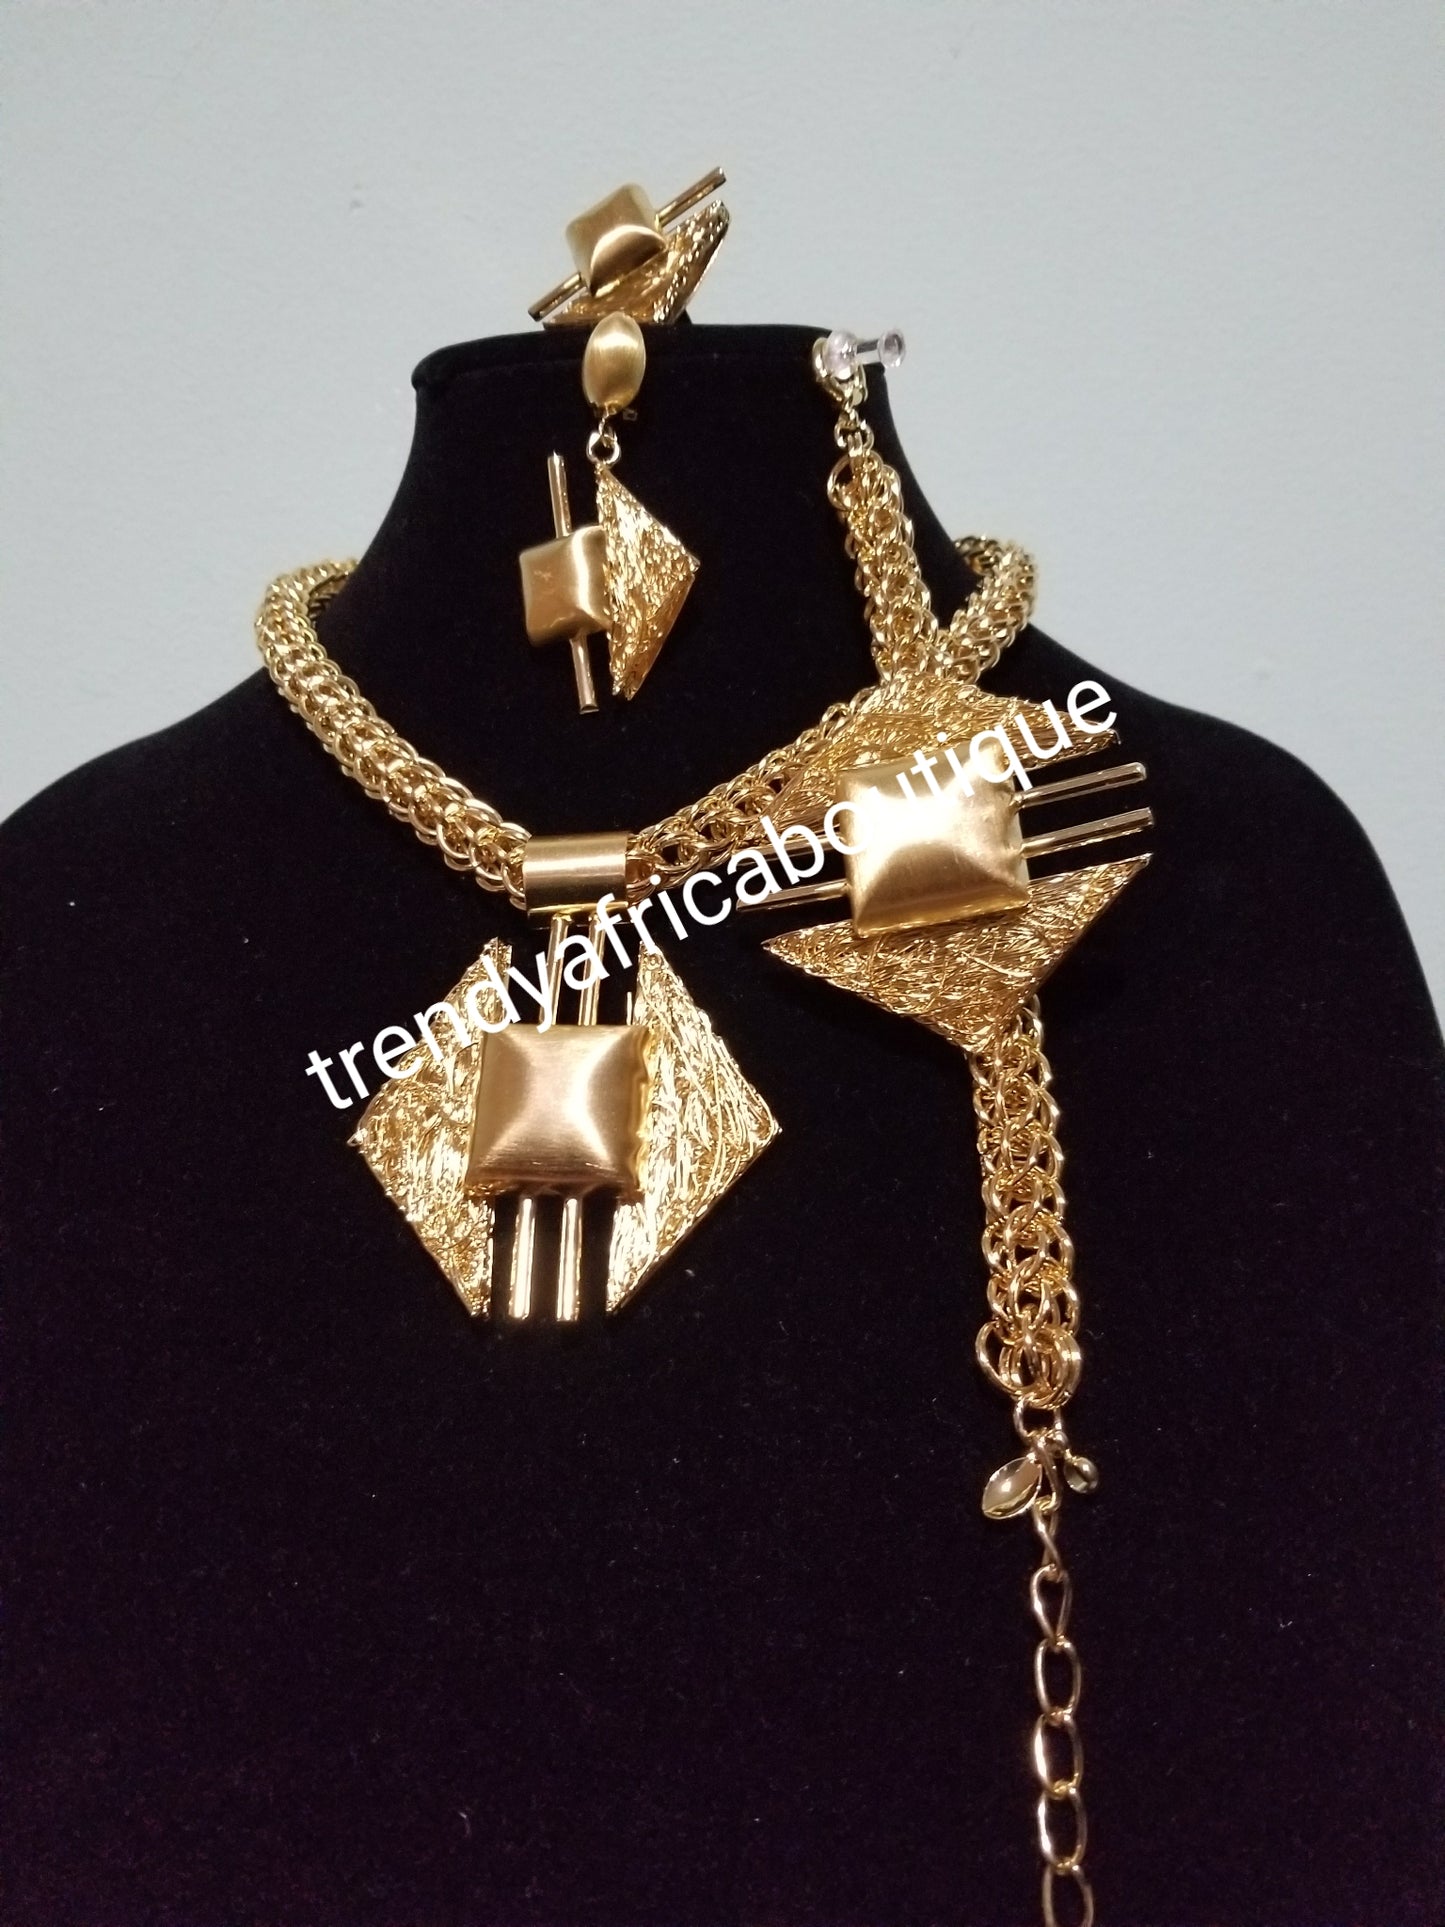 4pcs. 18k Gold-plated Costume jewelry set. 4pcs matching set for party or church wear. Sold as a set